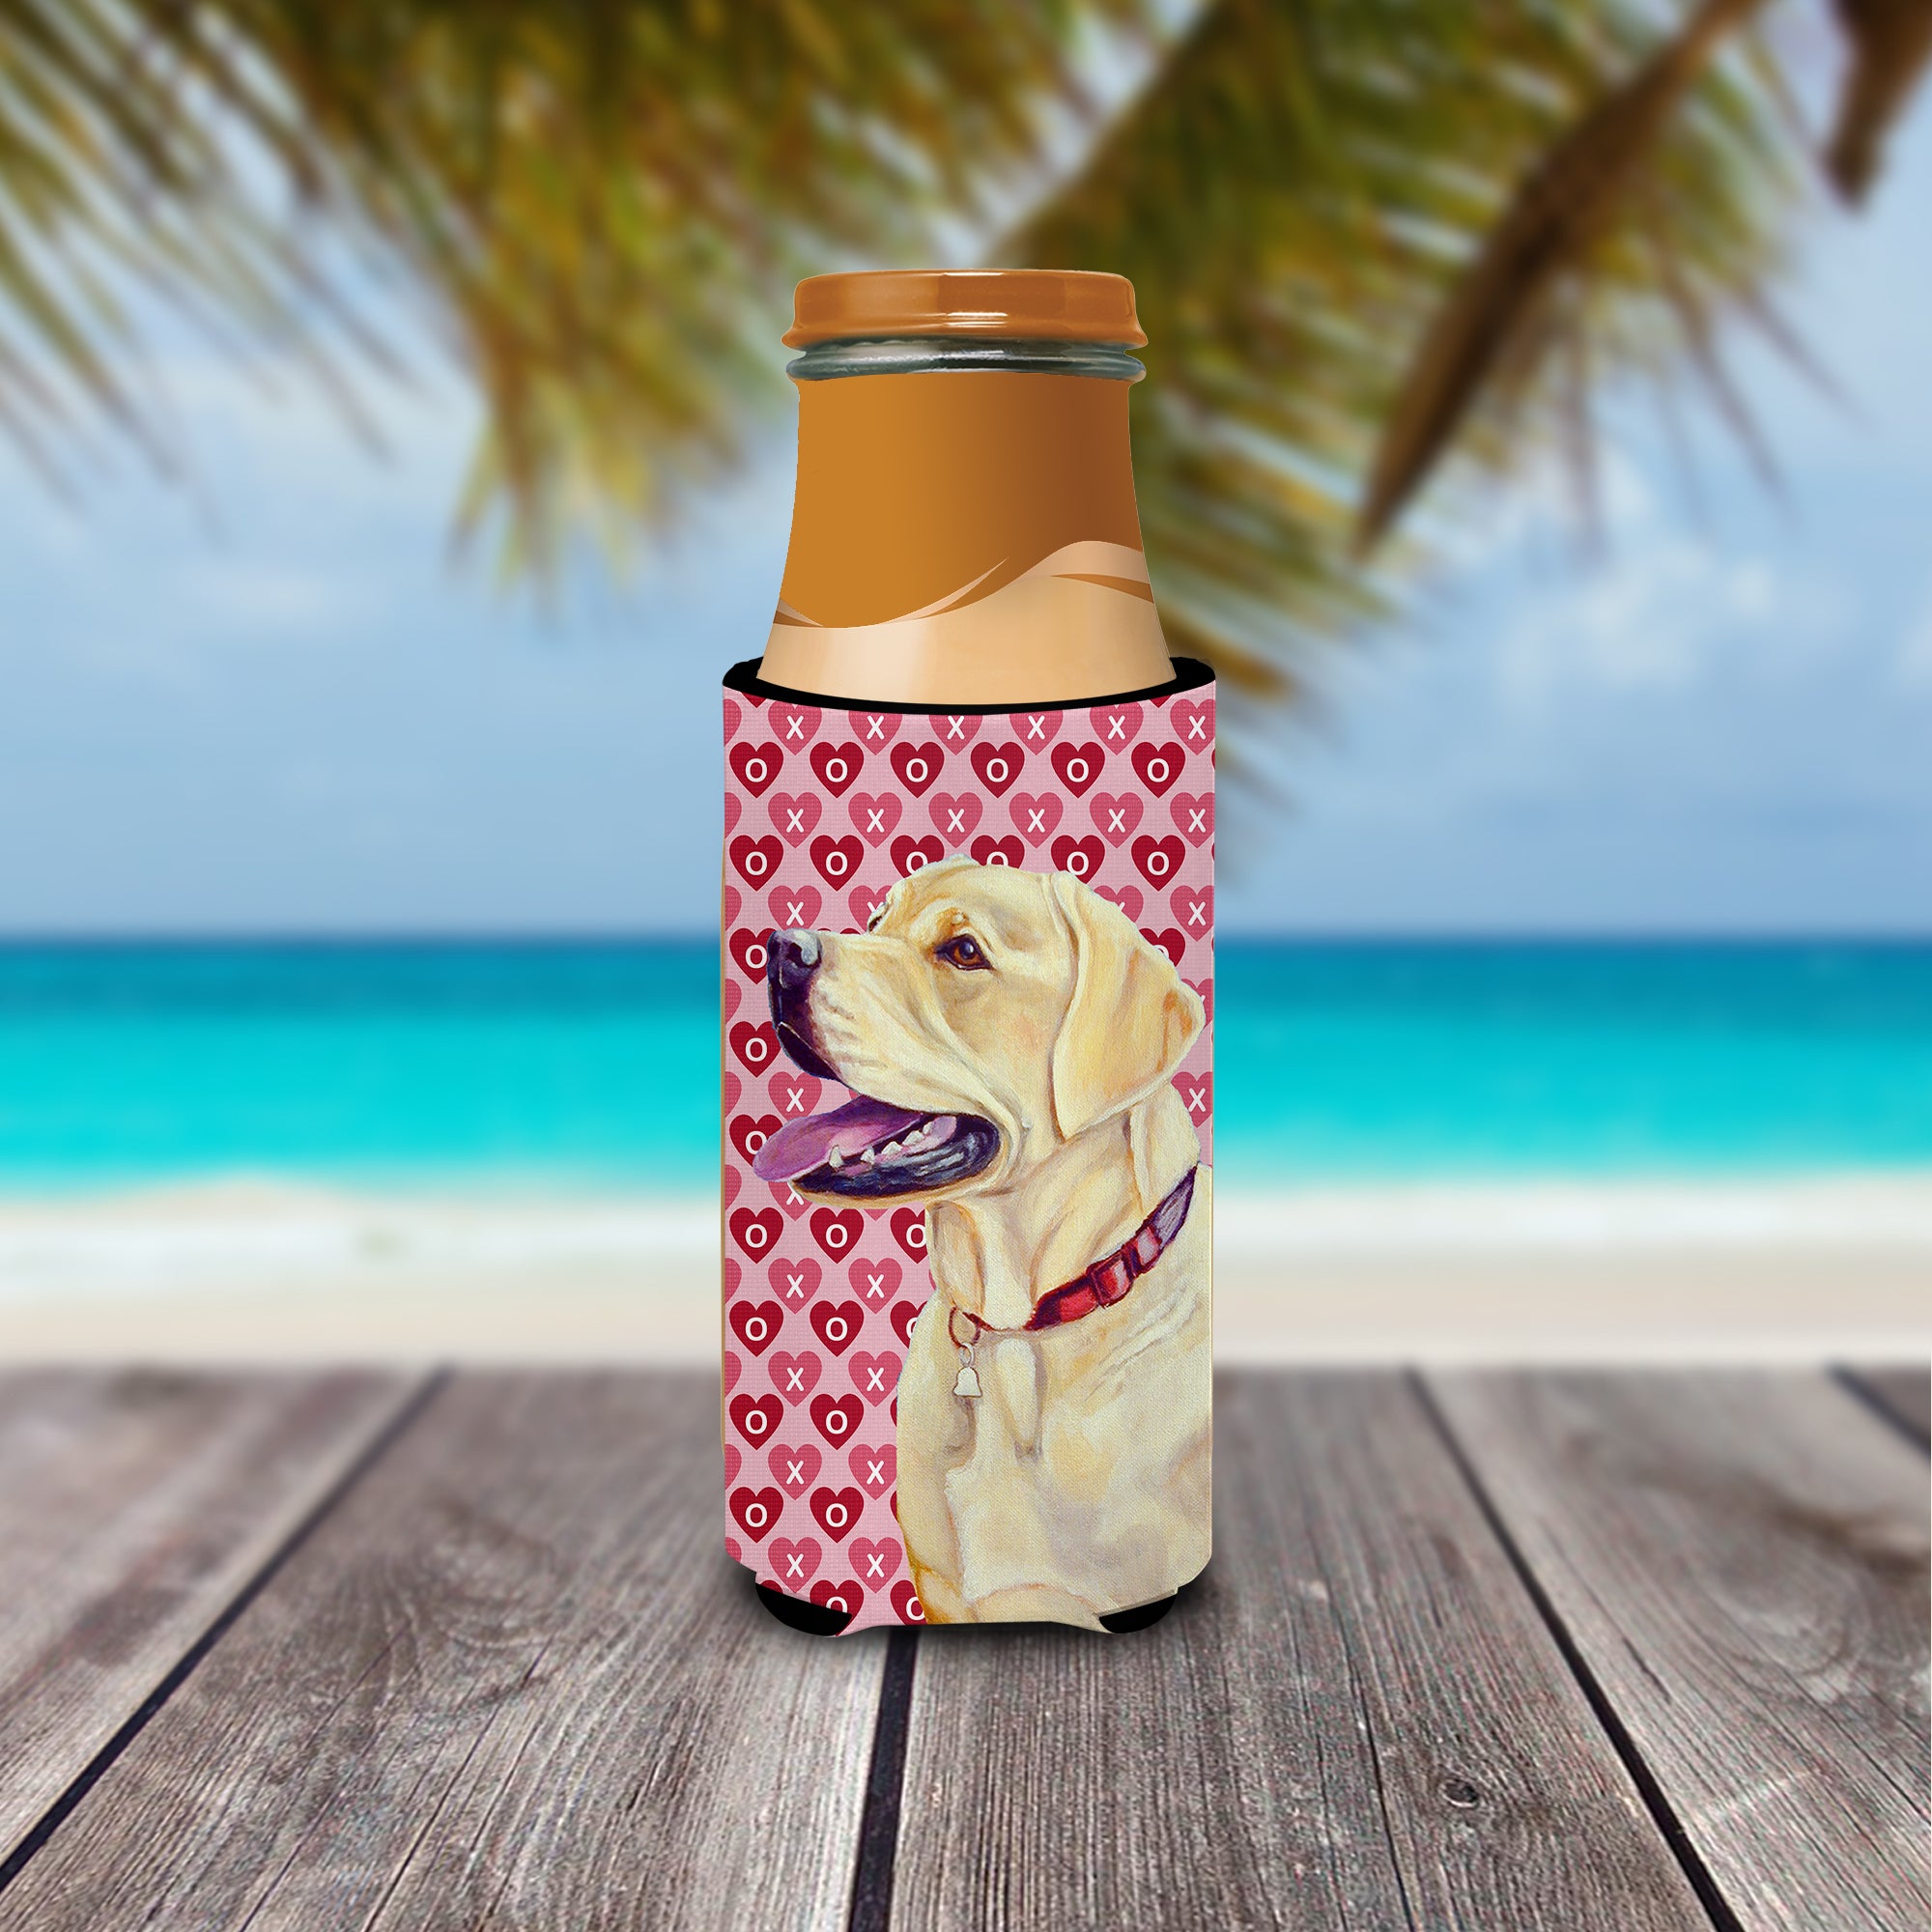 Labrador Hearts Love and Valentine's Day Portrait Ultra Beverage Insulators for slim cans LH9158MUK.